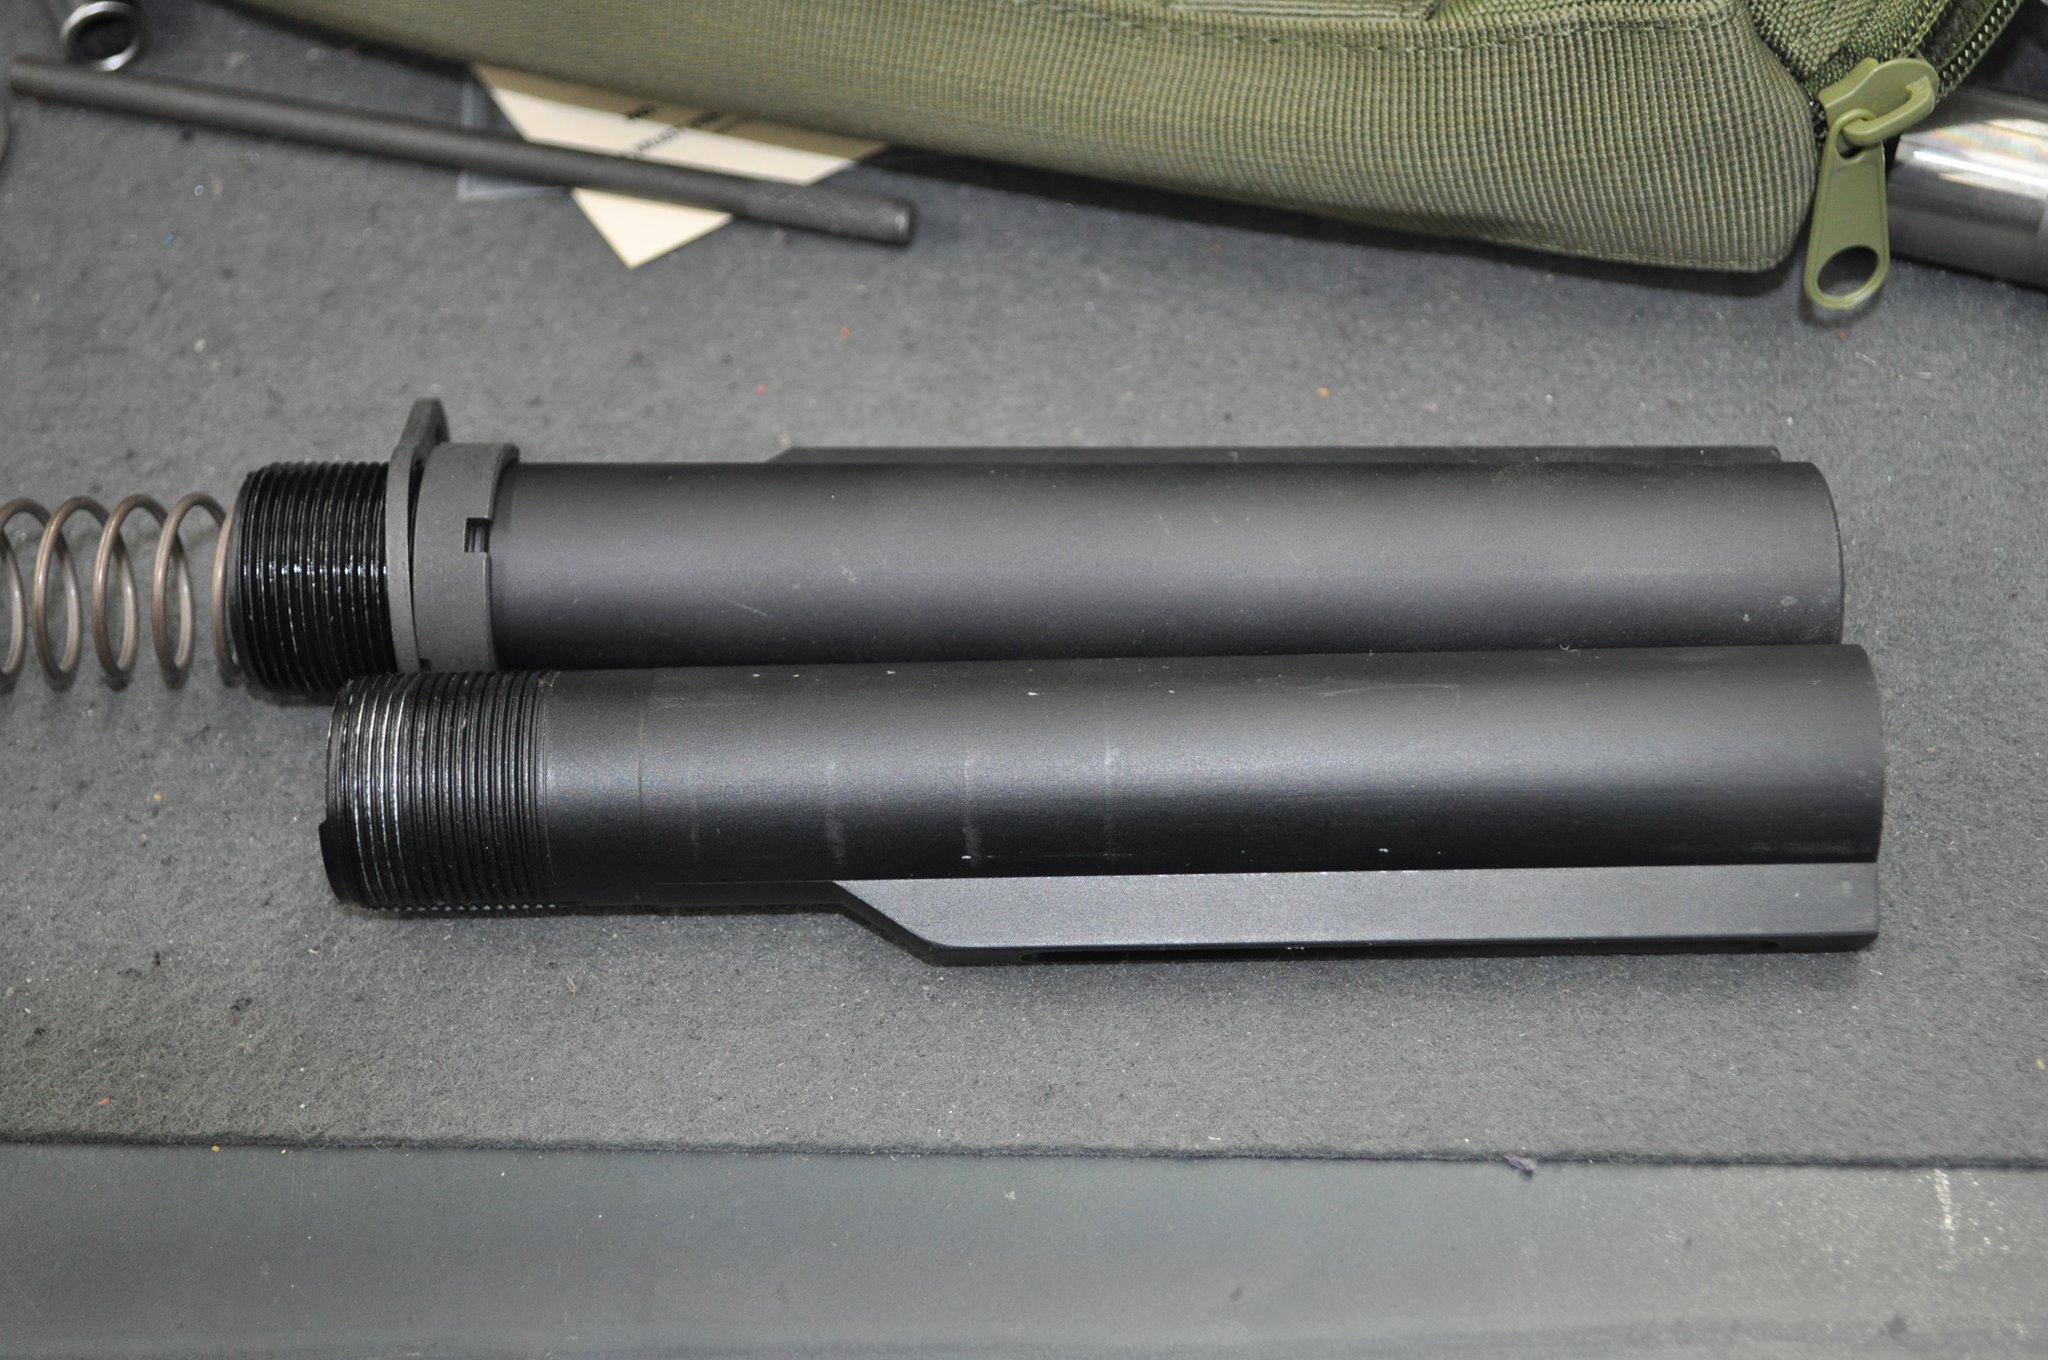 Knock off AR15 buffer tube (airsoft)